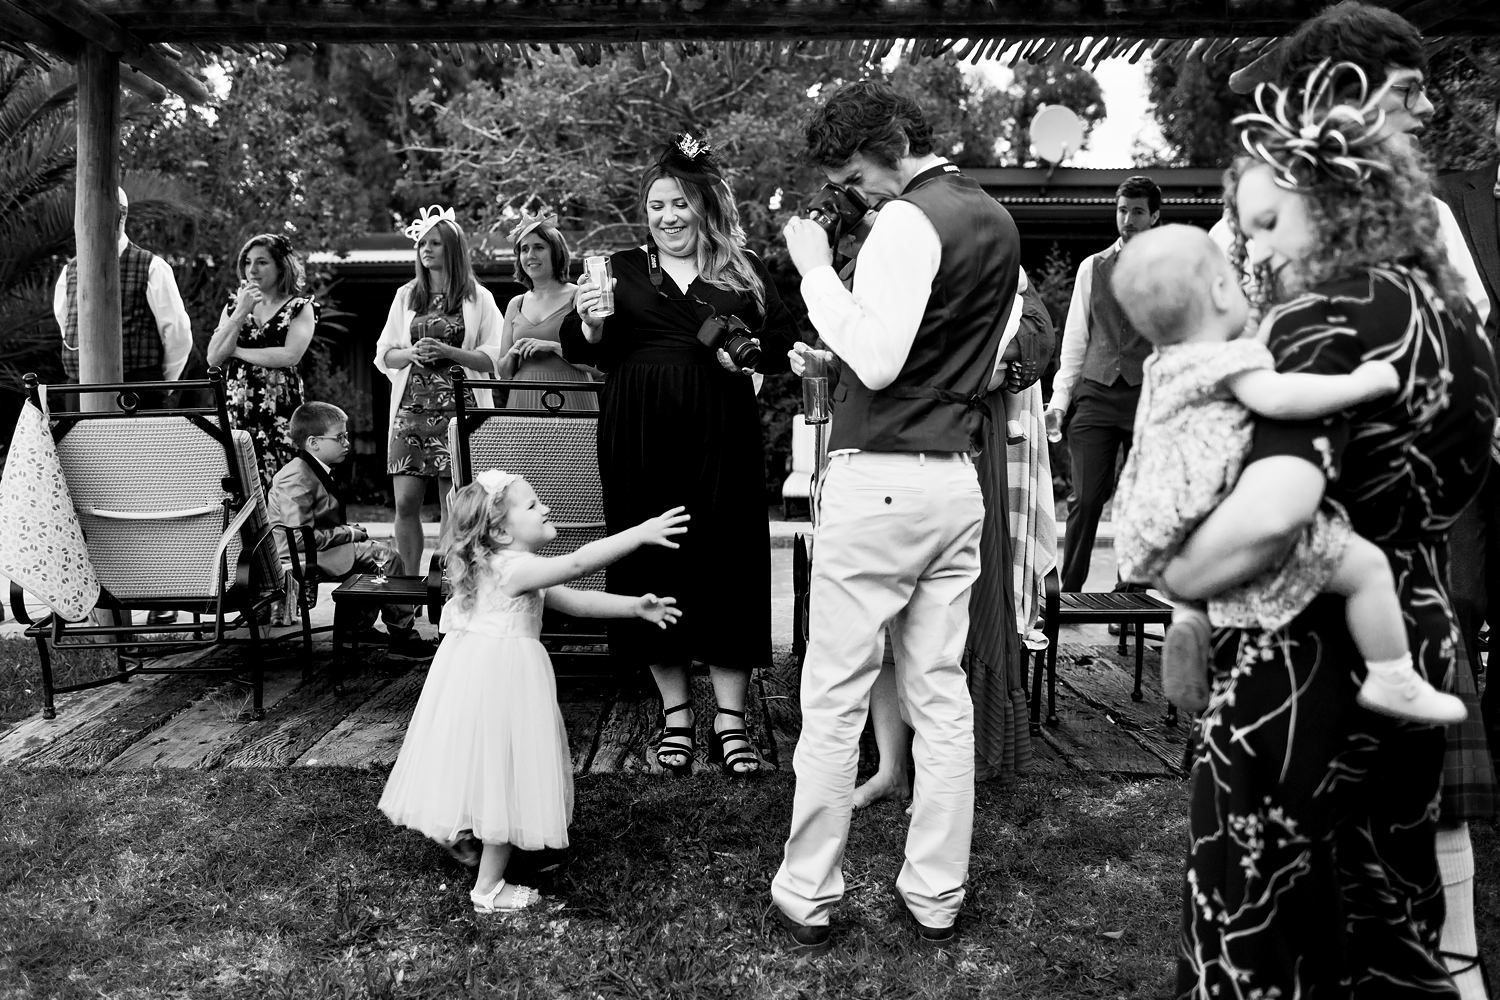 Keeping guests occupied during canapes creates beautiful moments for wedding photography as this father photographs his daughter playing and dancing